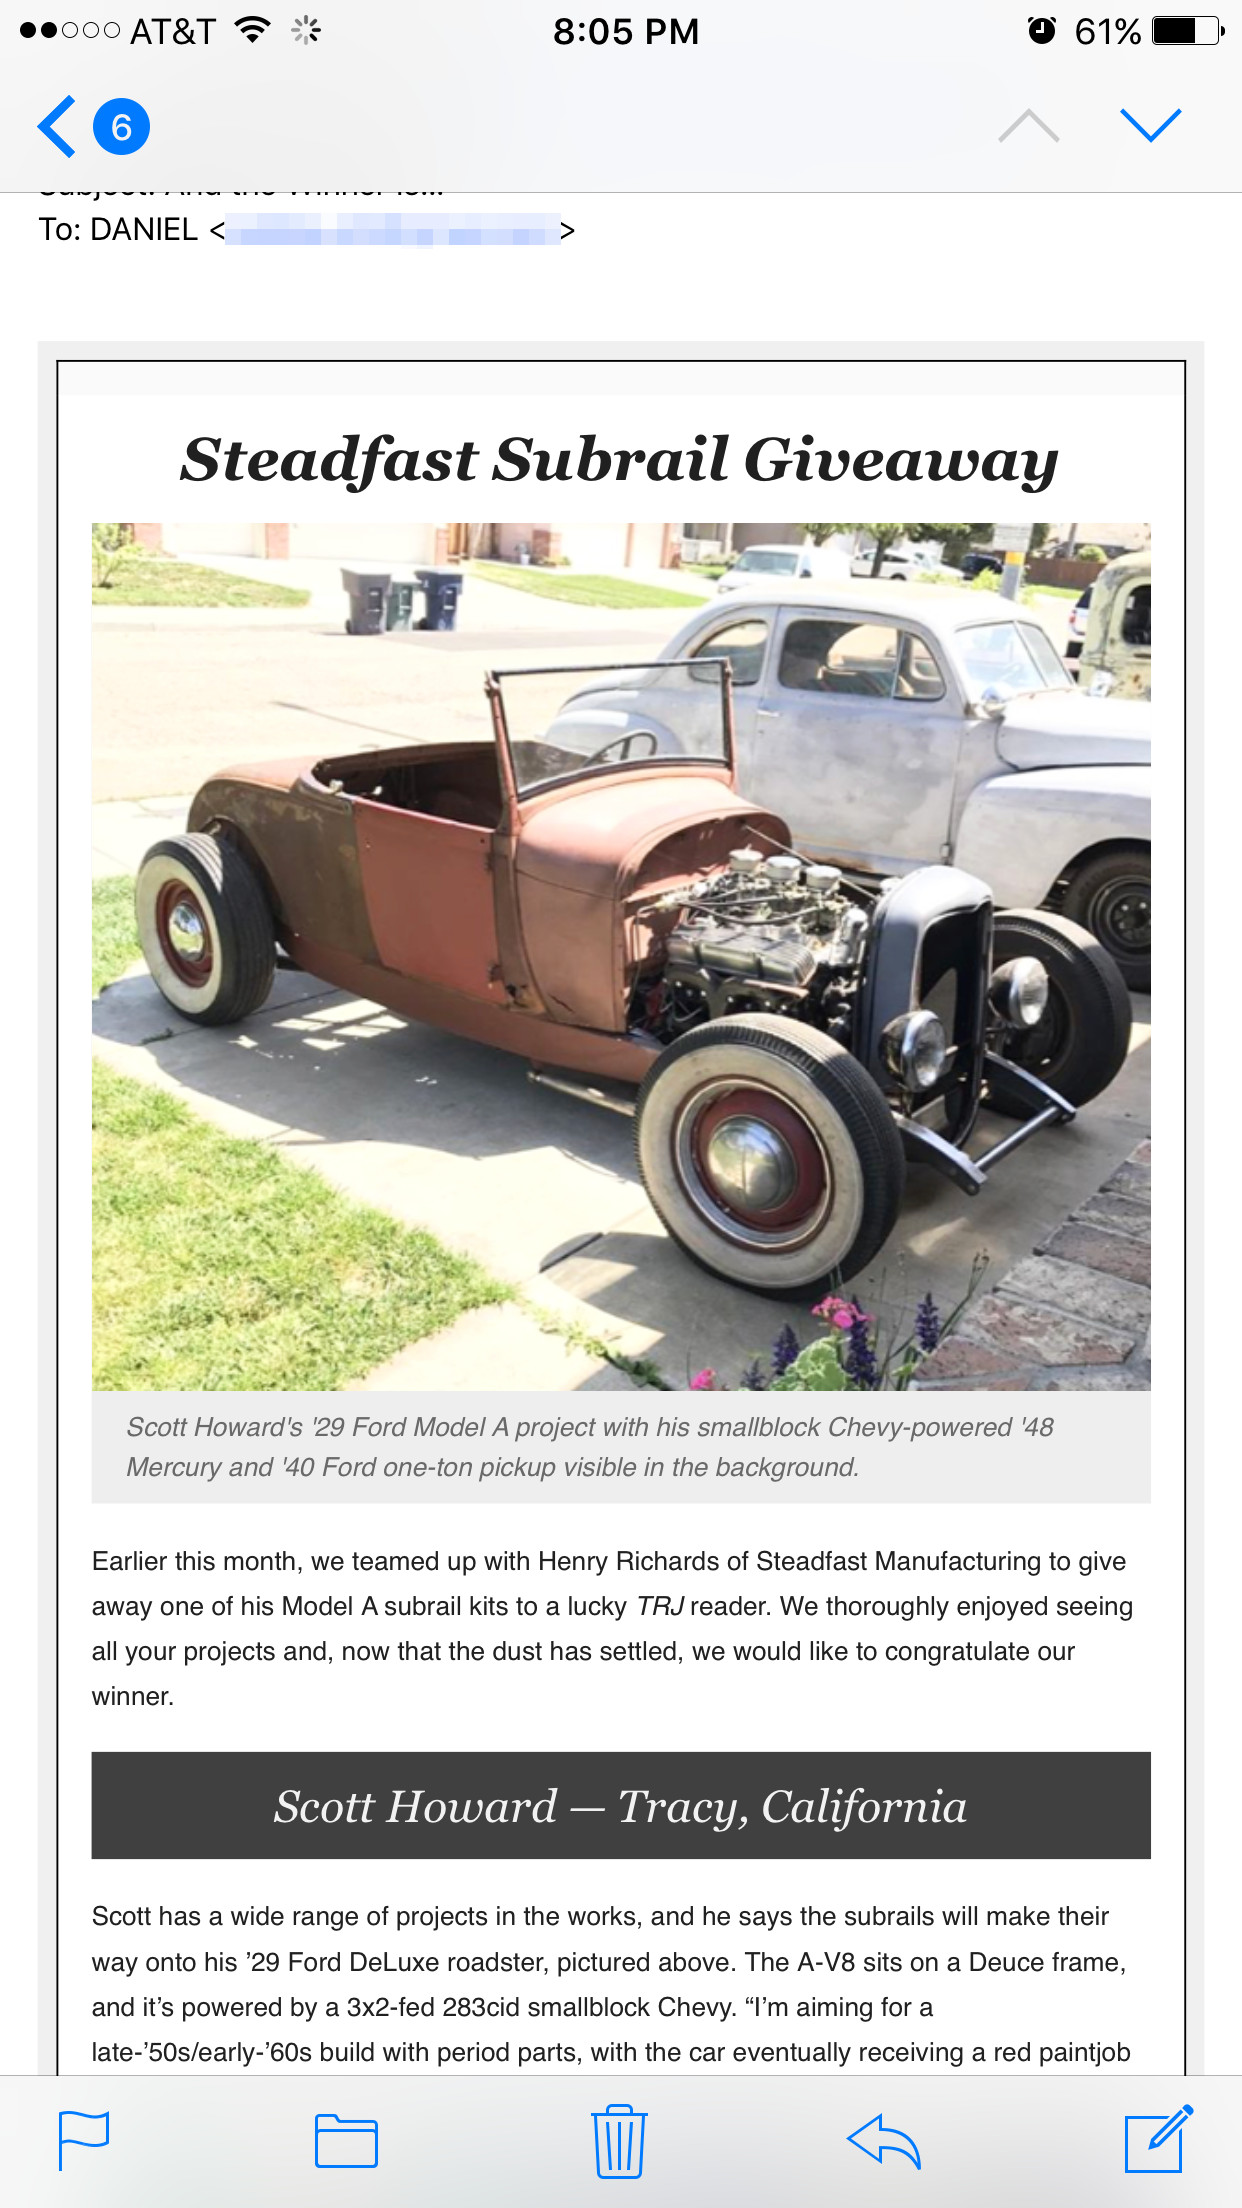 rodders journal steadfast subrails giveaway old cars hot rod model a 1929 Ford